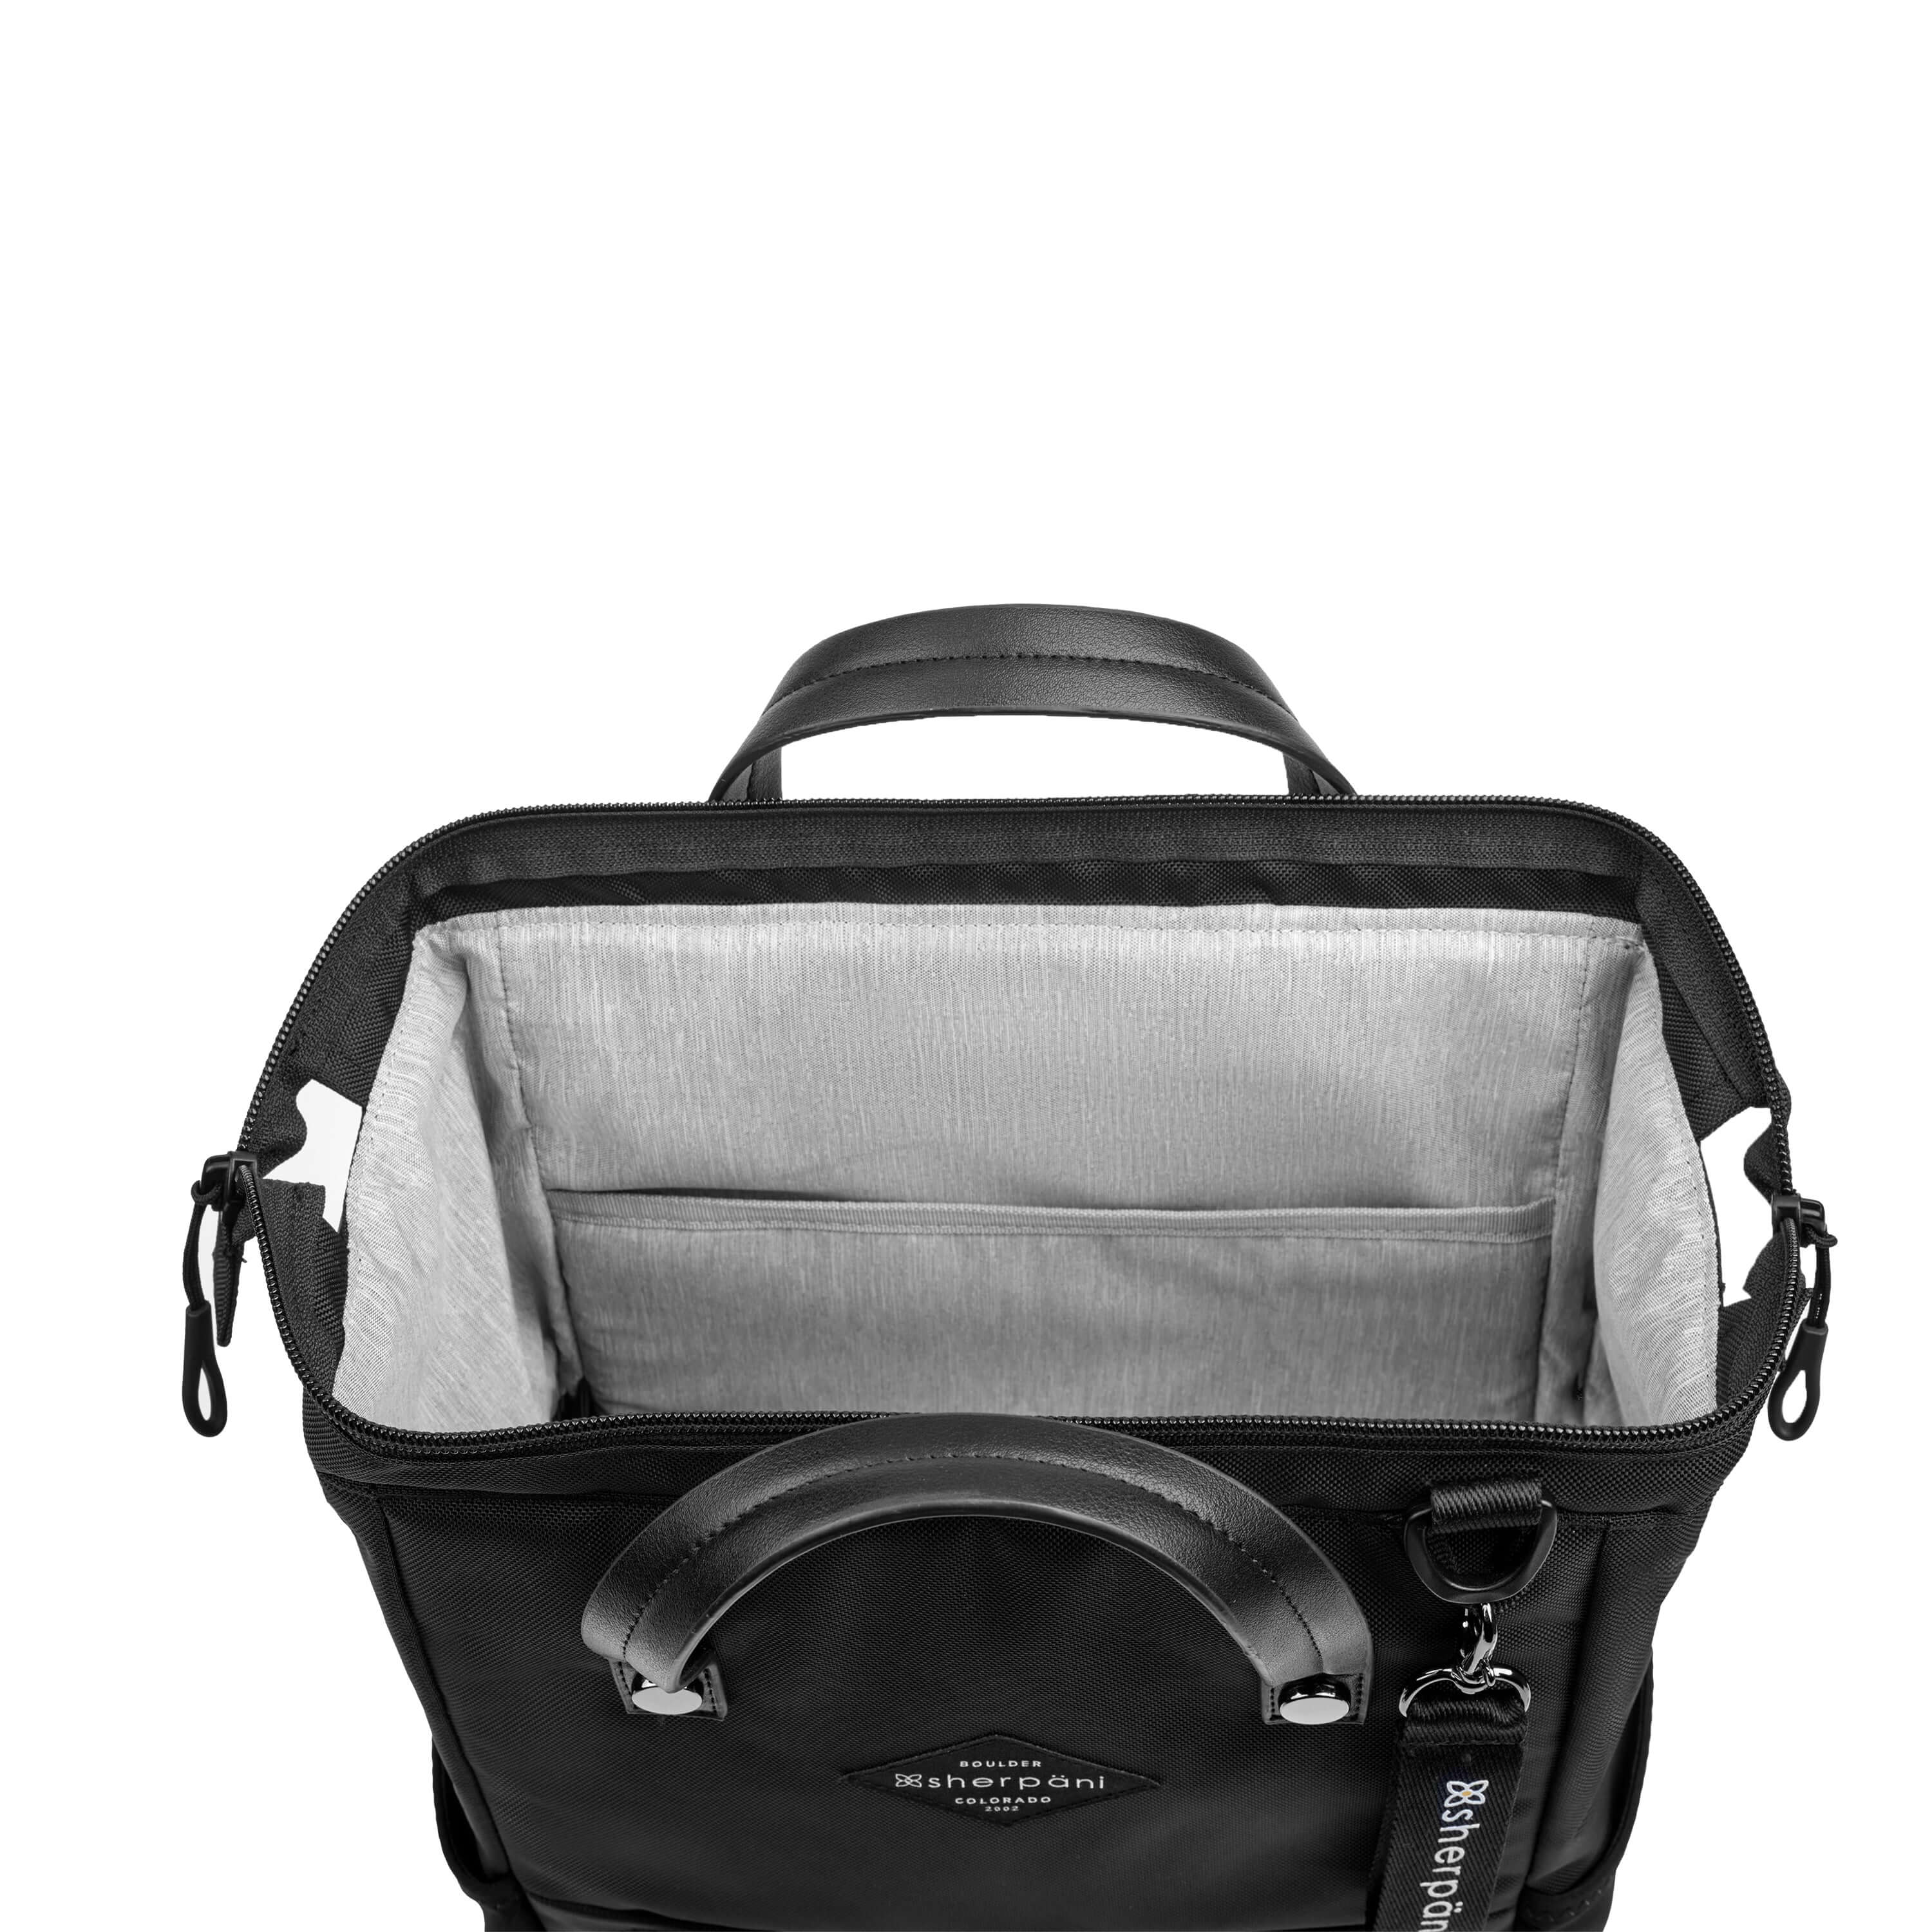 Top view of Sherpani three-in-one bag, the Dispatch in Raven. The main zipper compartment is open to reveal a doctor bag style opening with a rectangular metal frame. The inside of the bag is light gray and features an internal pouch.